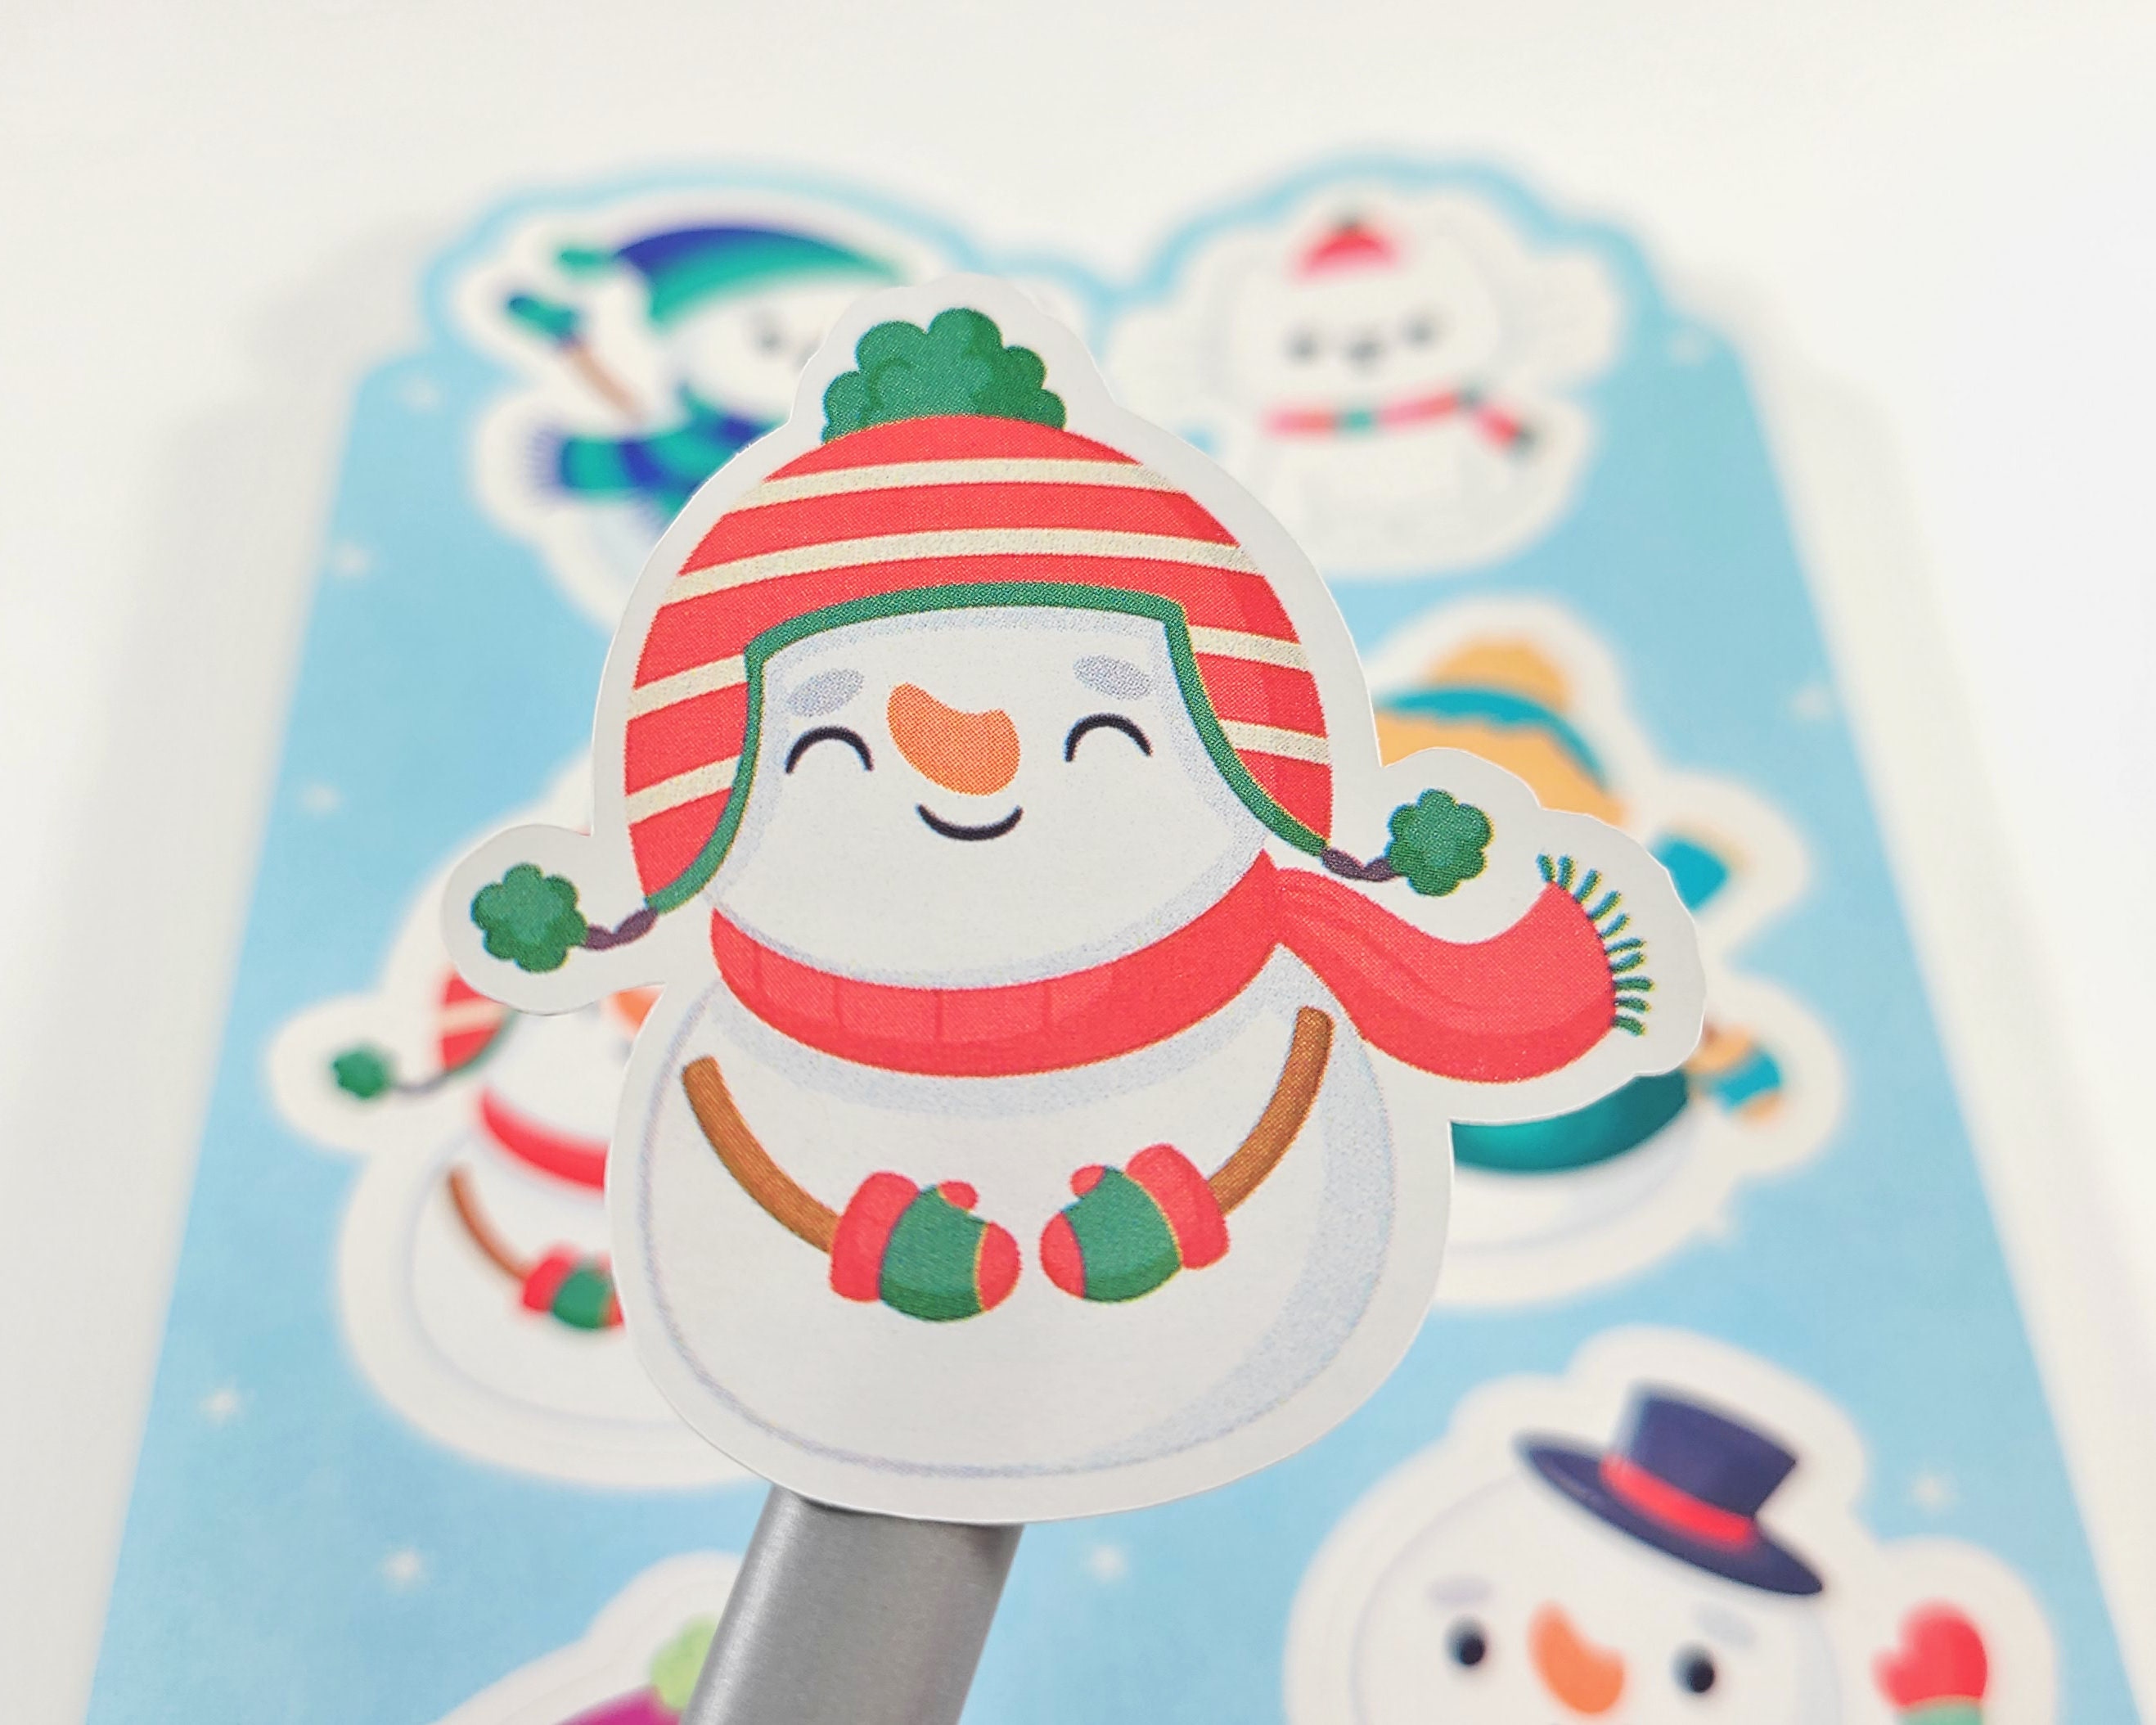 Eaasty 500 Pcs Snowman Stickers Winter Stickers for Crafts, Christmas  Snowman Stickers for Kids Classroom Scrapbooking Stationery Assignments  Holiday